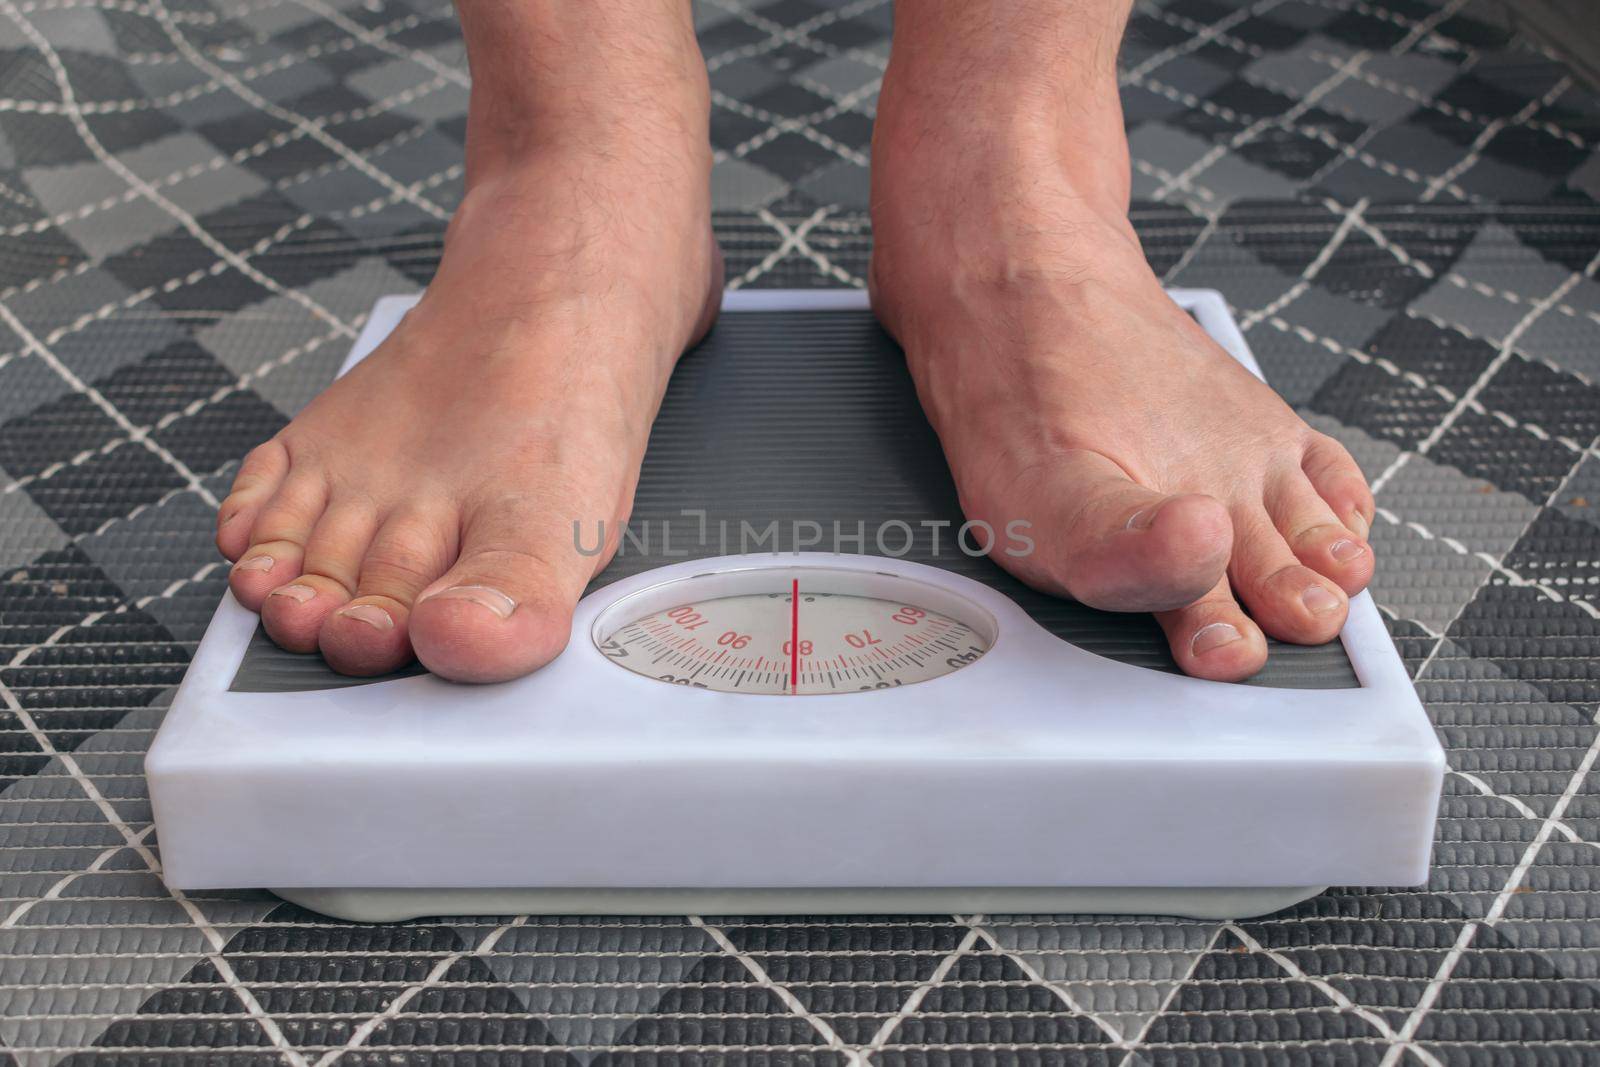 A young man is weighed barefoot on the scales in order to control his weight, keep a diet and lead a healthy lifestyle